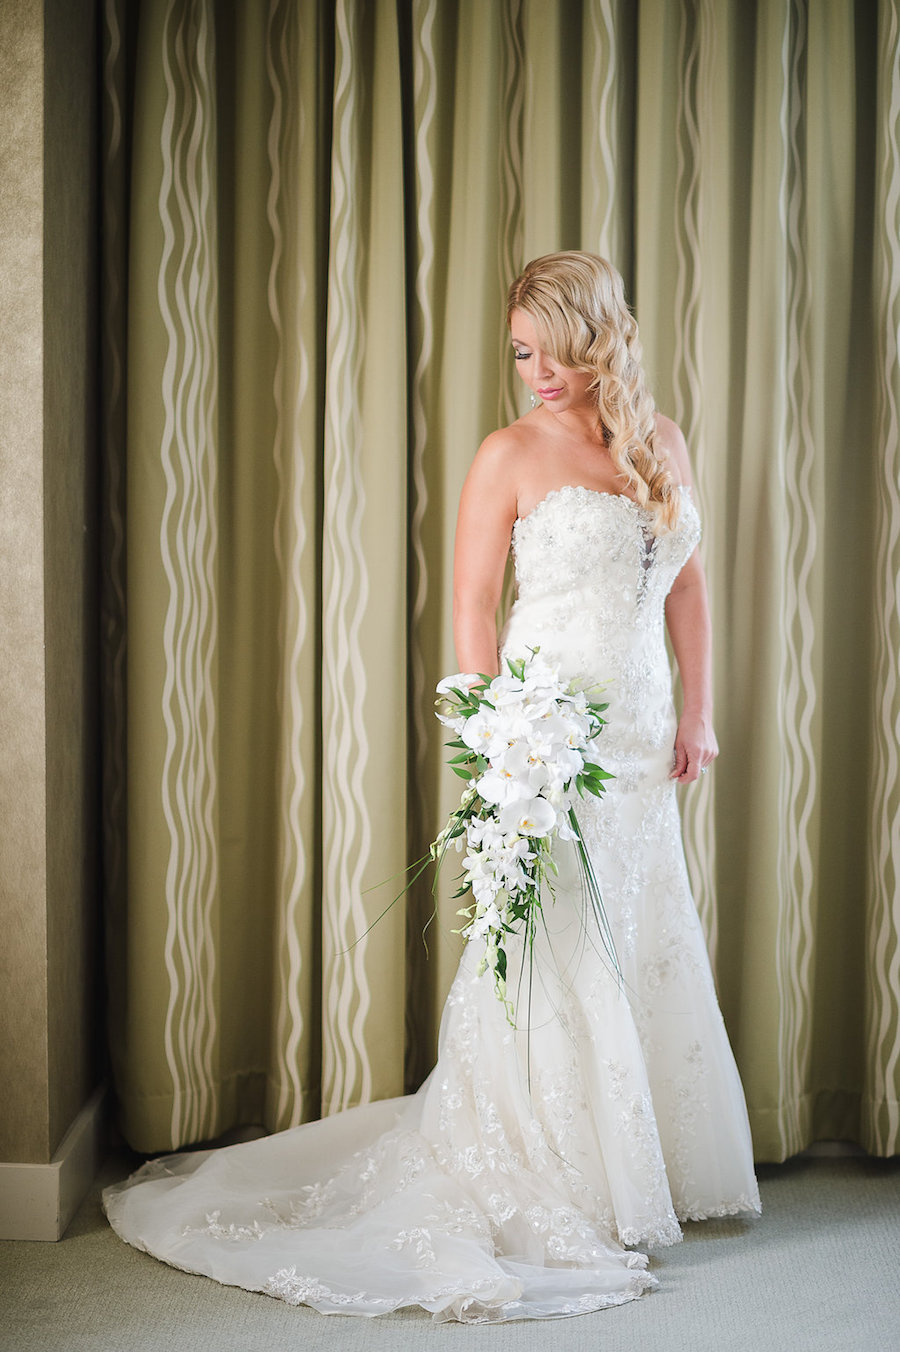 Bridal Wedding Day Portrait in Strapless Wedding Gown with Long Hair | Picture by Tampa Bay Wedding Photographer Marc Edwards Photographs